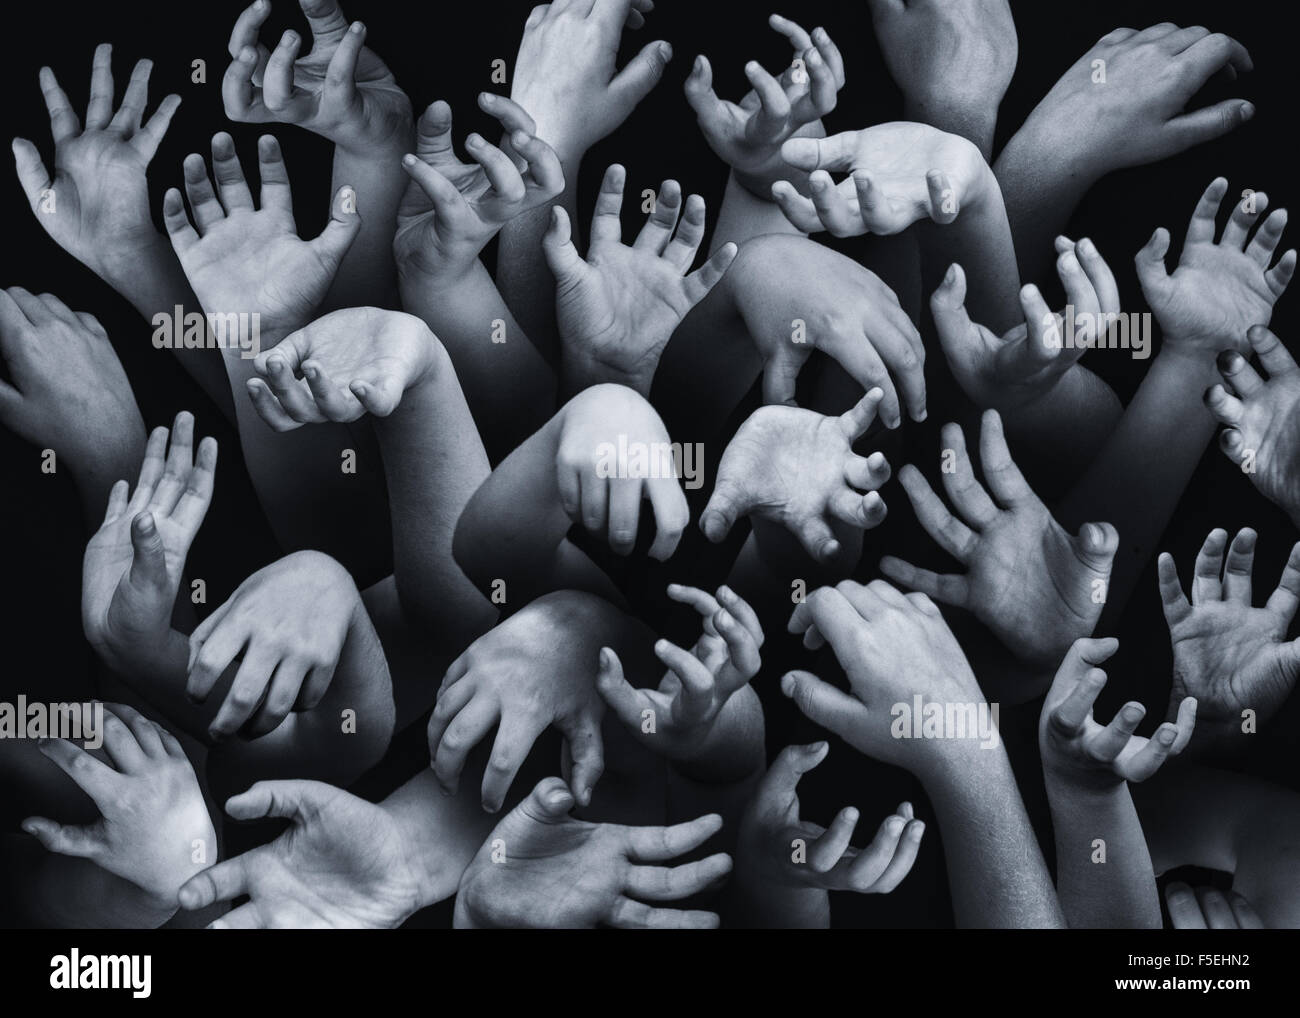 Close-up of hands reaching out Stock Photo